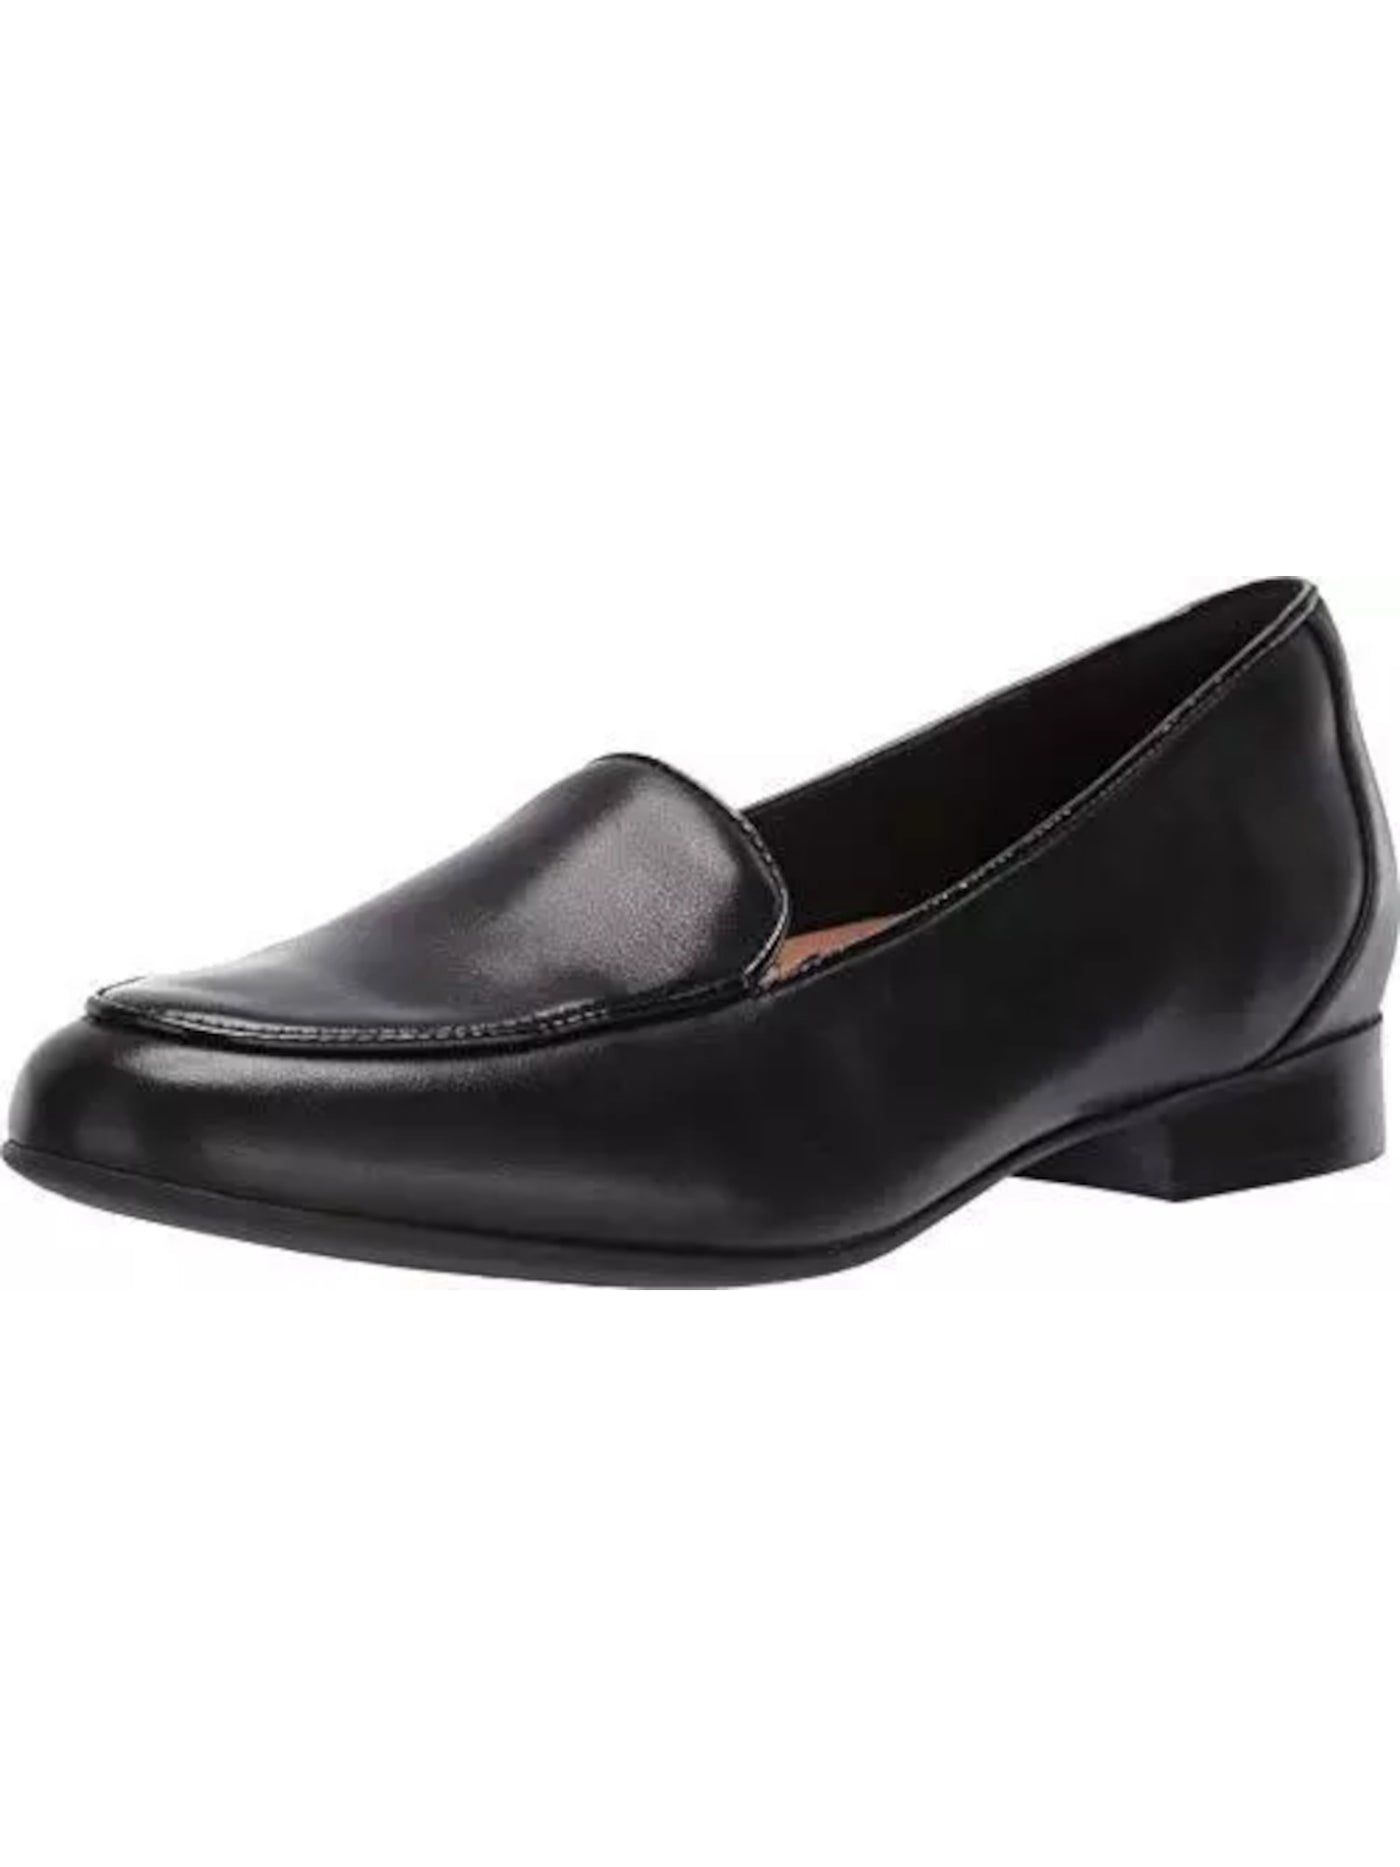 UNSTRUCTURED Womens Black Notched Padded Un Blush Almond Toe Slip On Leather Loafers Shoes 8.5 W